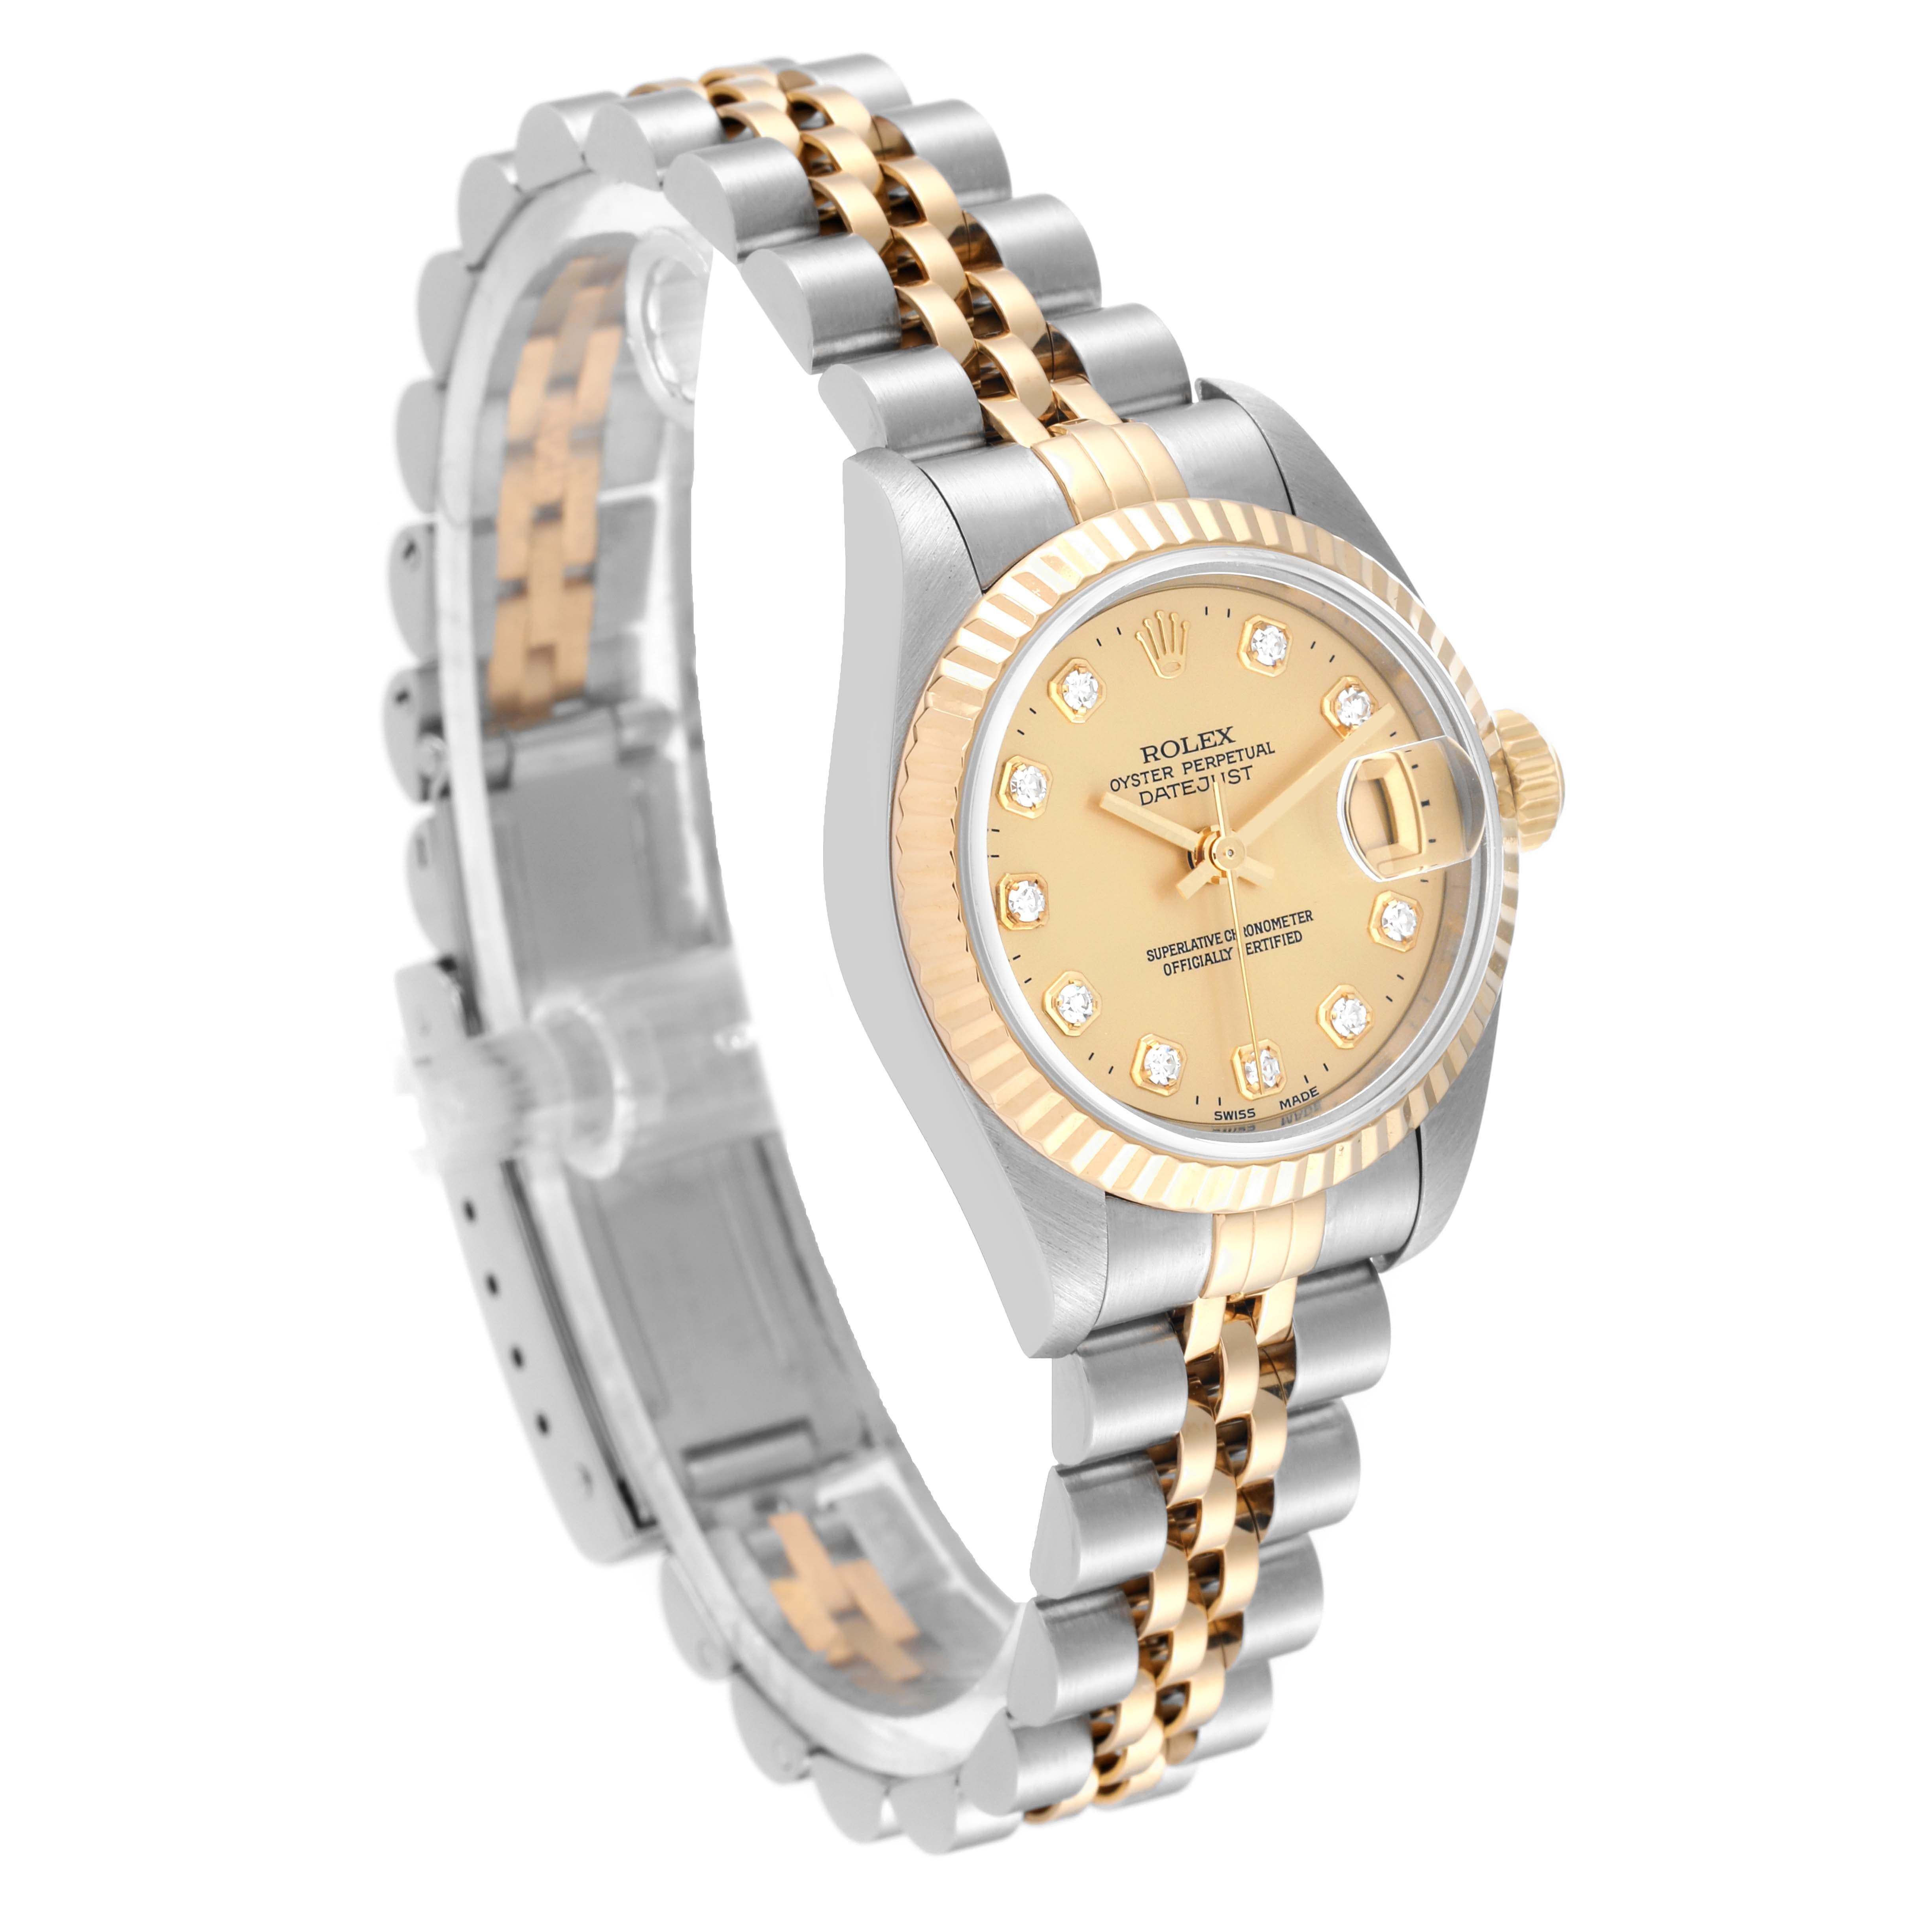 Rolex Datejust Steel Yellow Gold Diamond Dial Ladies Watch 69173 In Excellent Condition For Sale In Atlanta, GA